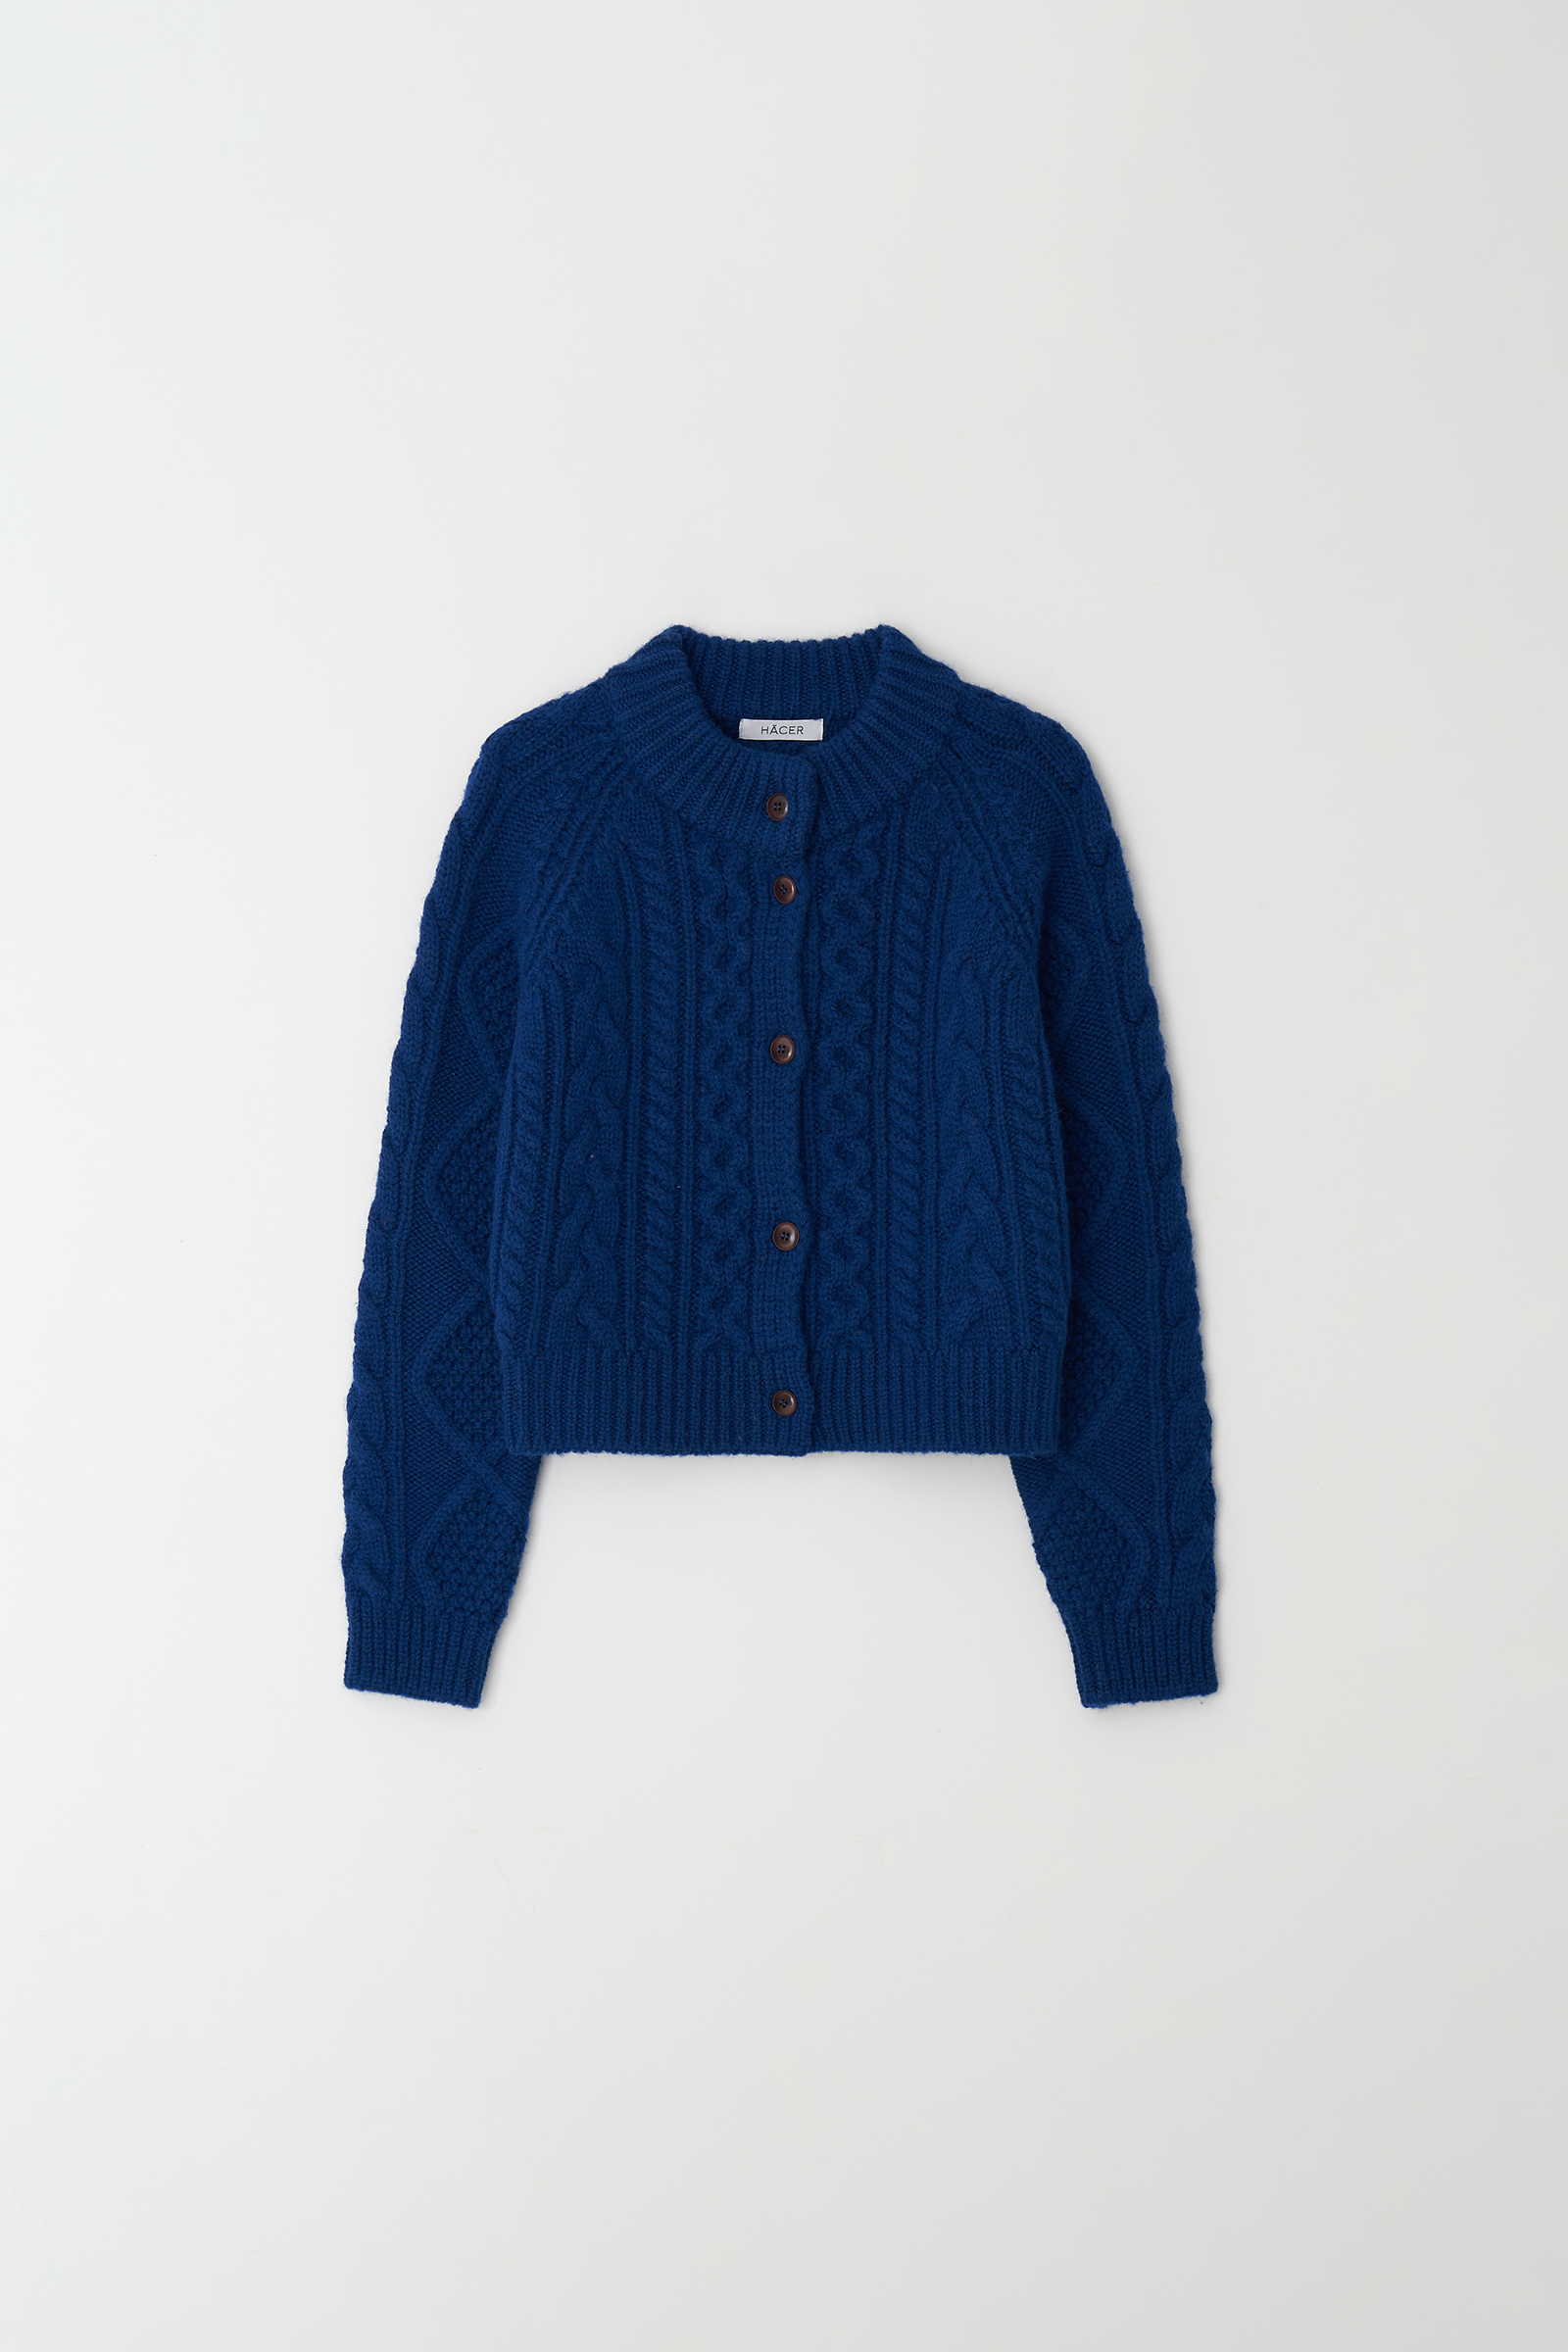 Cable Cardigan